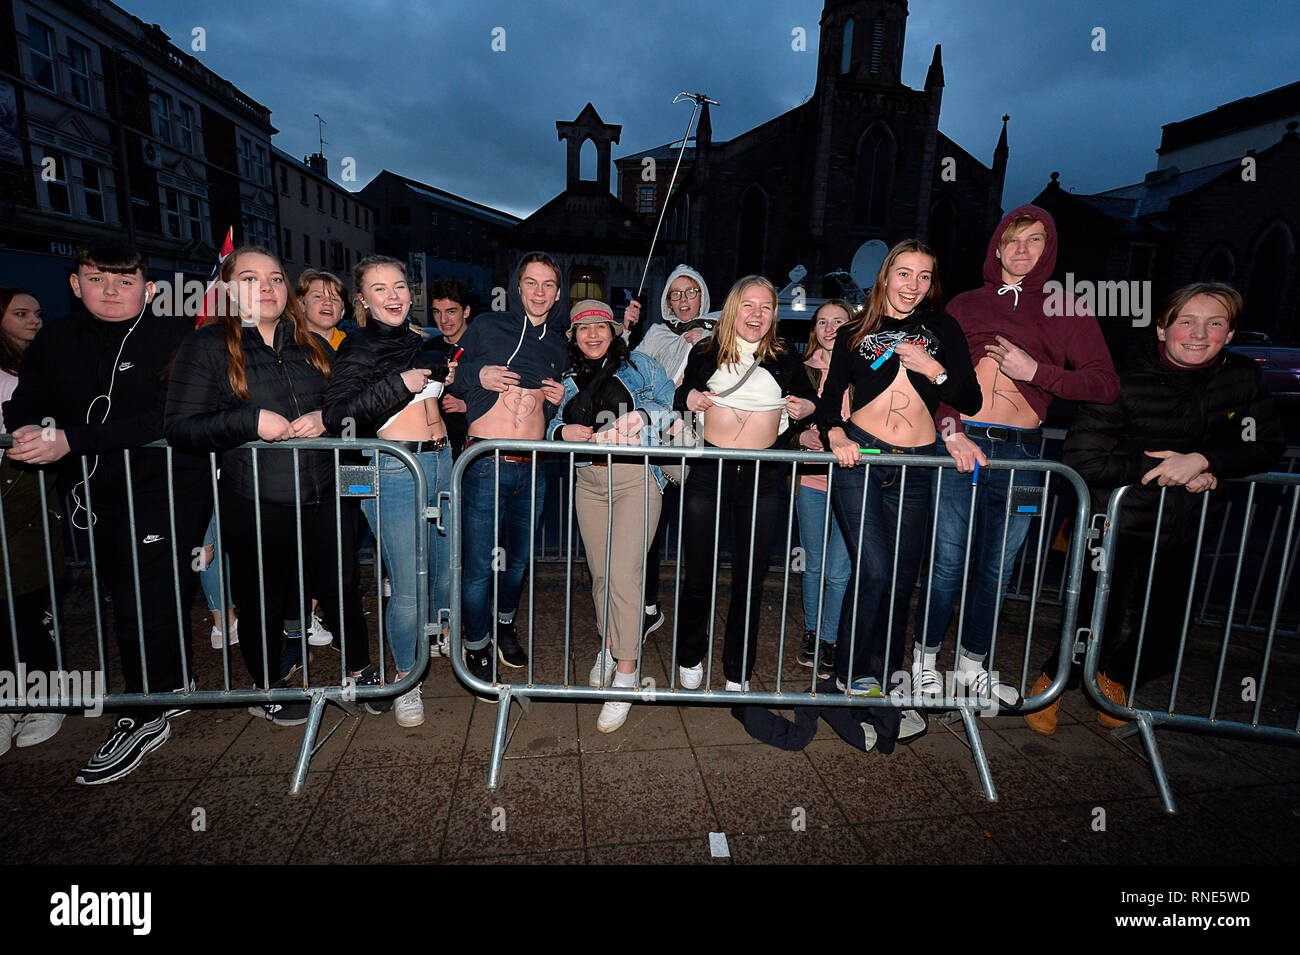 Londonderry, UK. 18th Feb, 2019. Derry Girls Series 2 Premiere, Londonderry, Northern Ireland: 18th February 2019. Derry Girls fans outside the the Omniplex Cinema, Londonderry for the premiere of Derry Girls Series 2.©George Sweeney / Alamy Live News Credit: George Sweeney/Alamy Live News Stock Photo